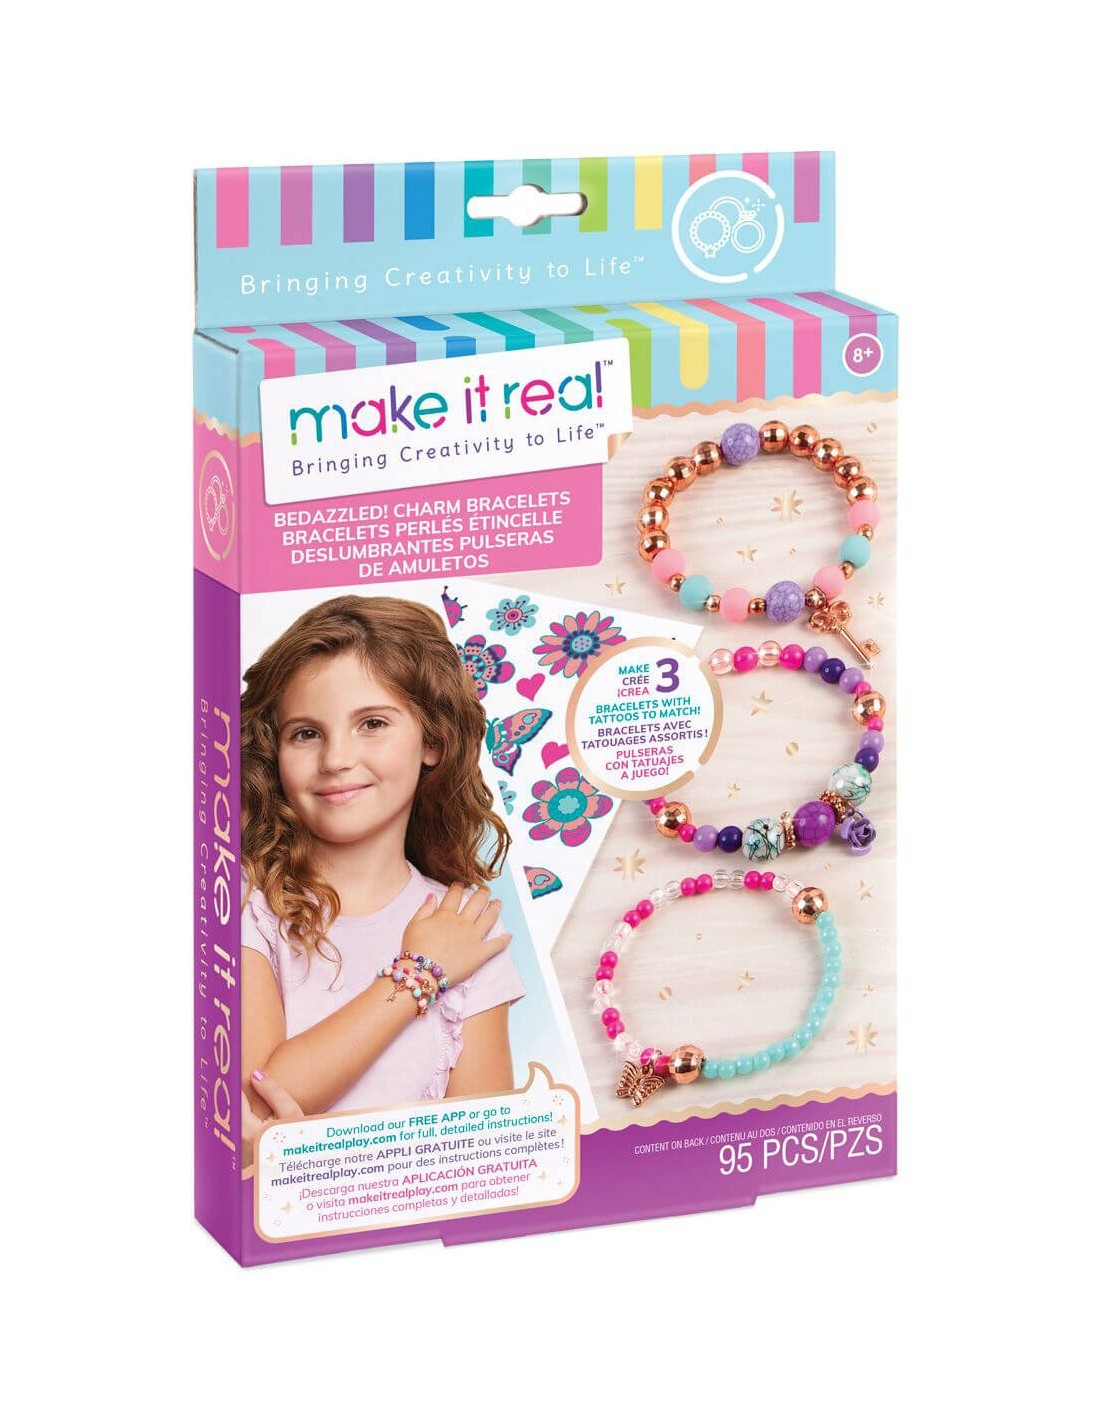 Make it Real - Bedazzled! Charm Bracelets - Blooming Creativity (049276)